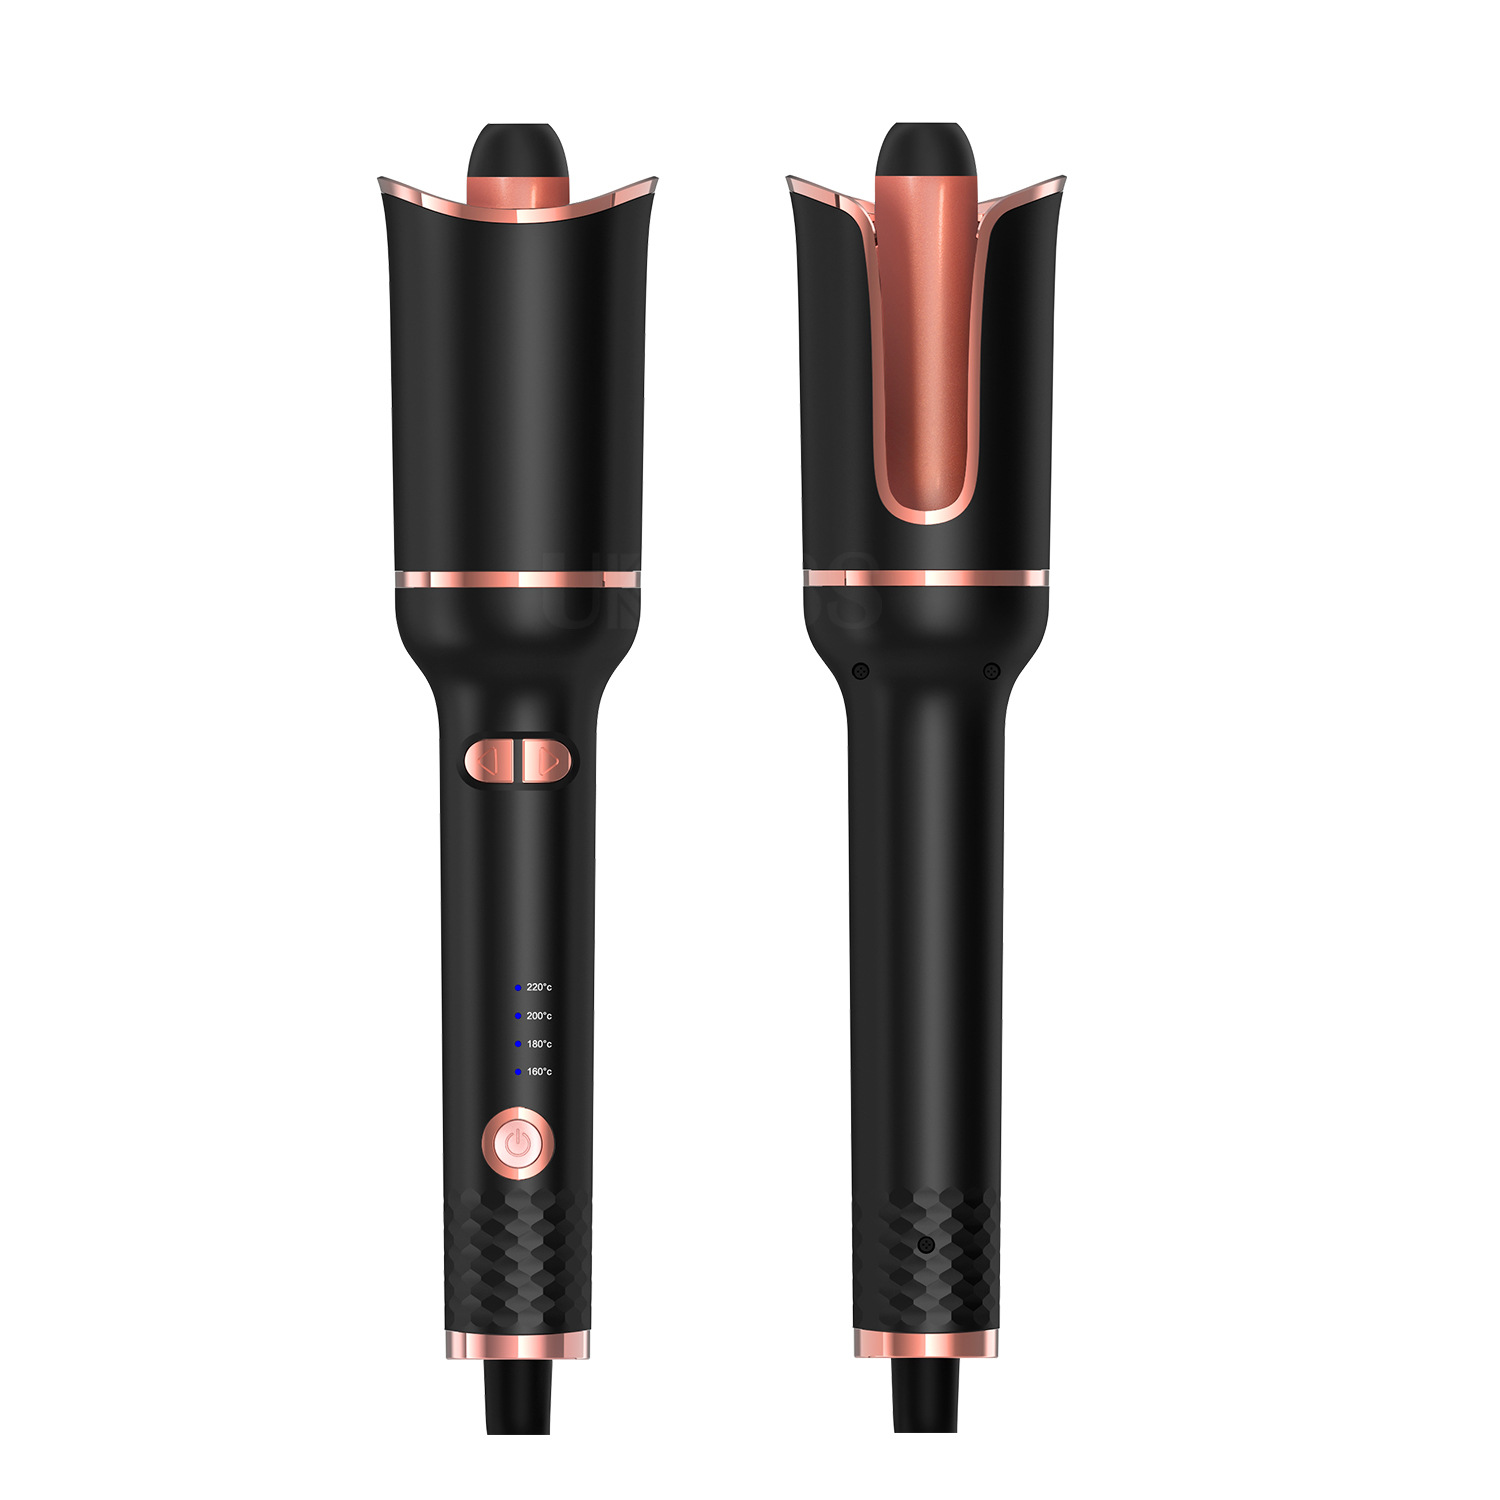 Automatic Hair Curling Iron Anti-Tangle &amp; Adjustable 4 Temps Levels